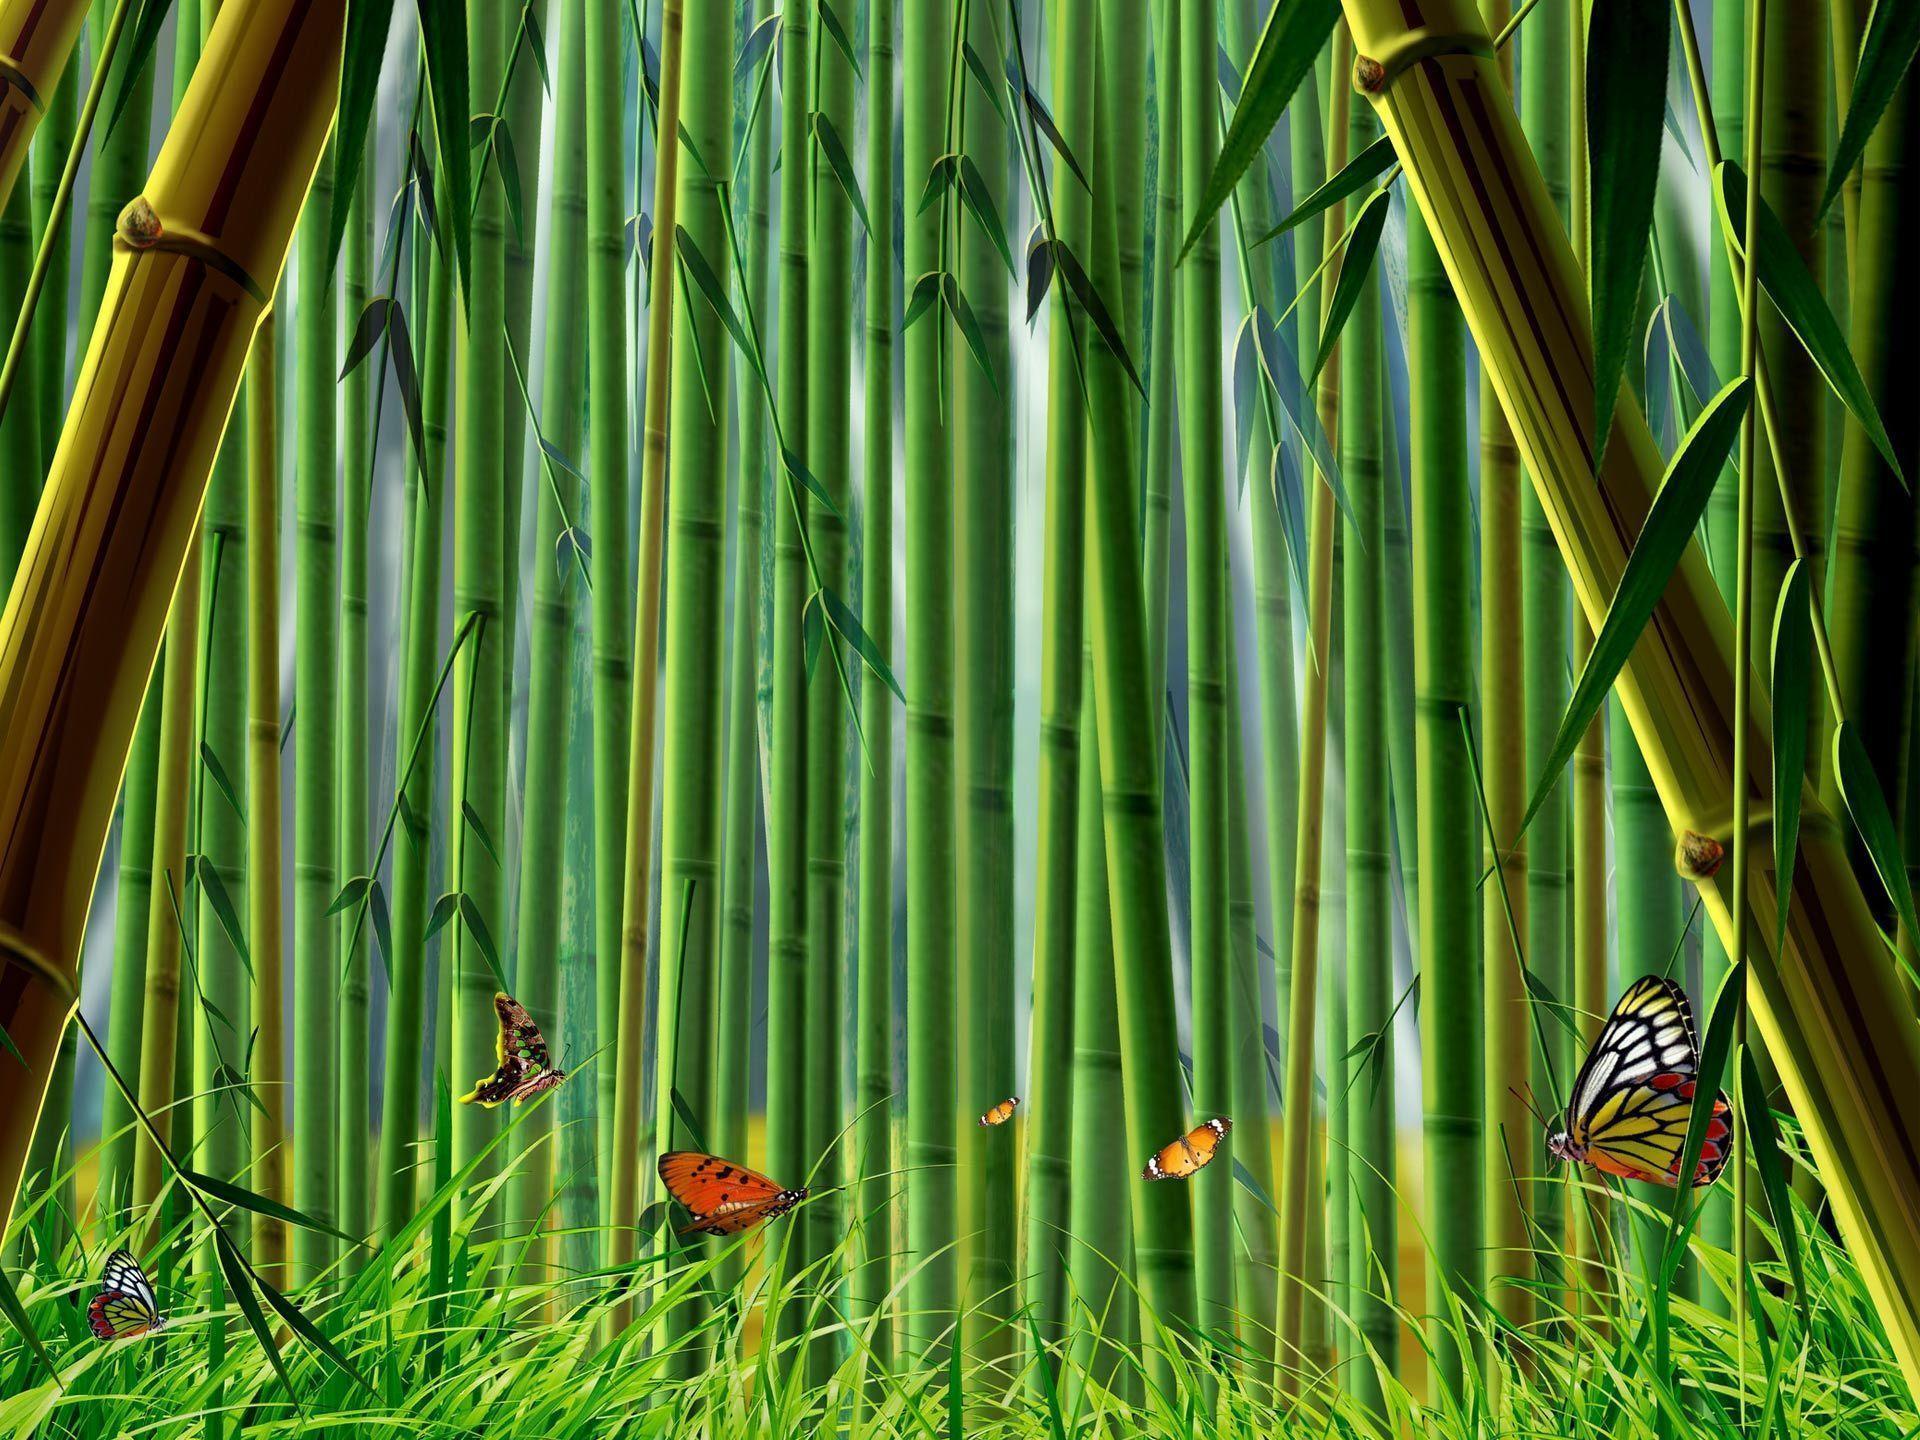 Desktop Wallpaper · Gallery · Computers · Bamboo Forest. Free